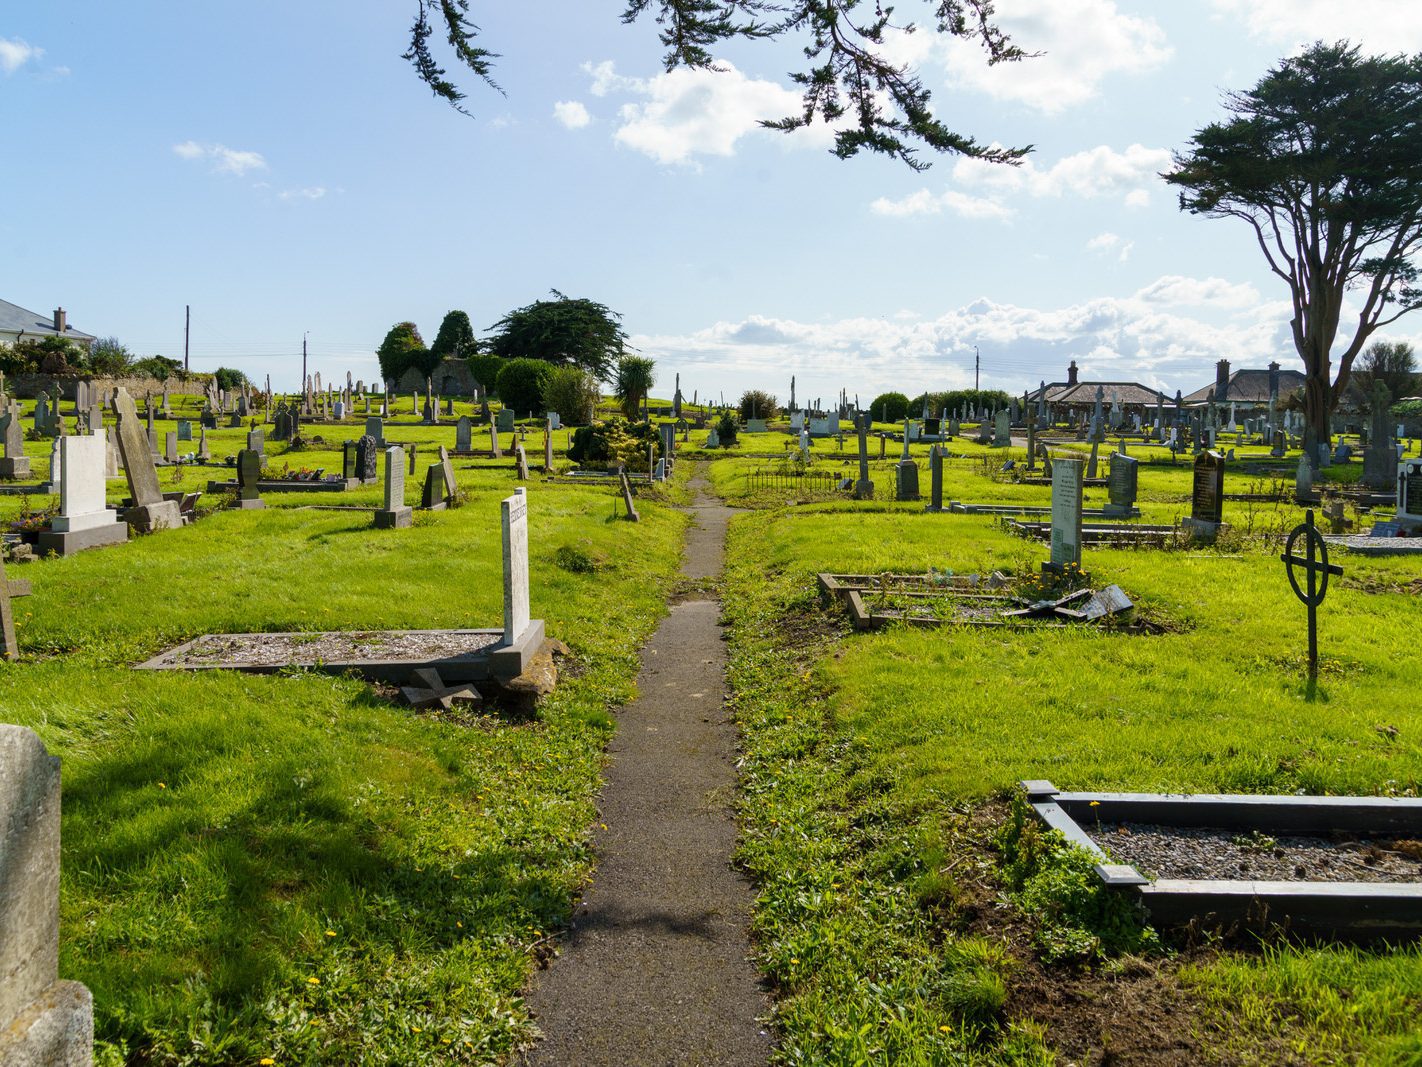 TODAY I MANAGED TO VISIT KILBARRACK CEMETERY [AFTER A NUMBER OF FAILED ATTEMPTS OVER A PERIOD OF TEN YEARS] 034